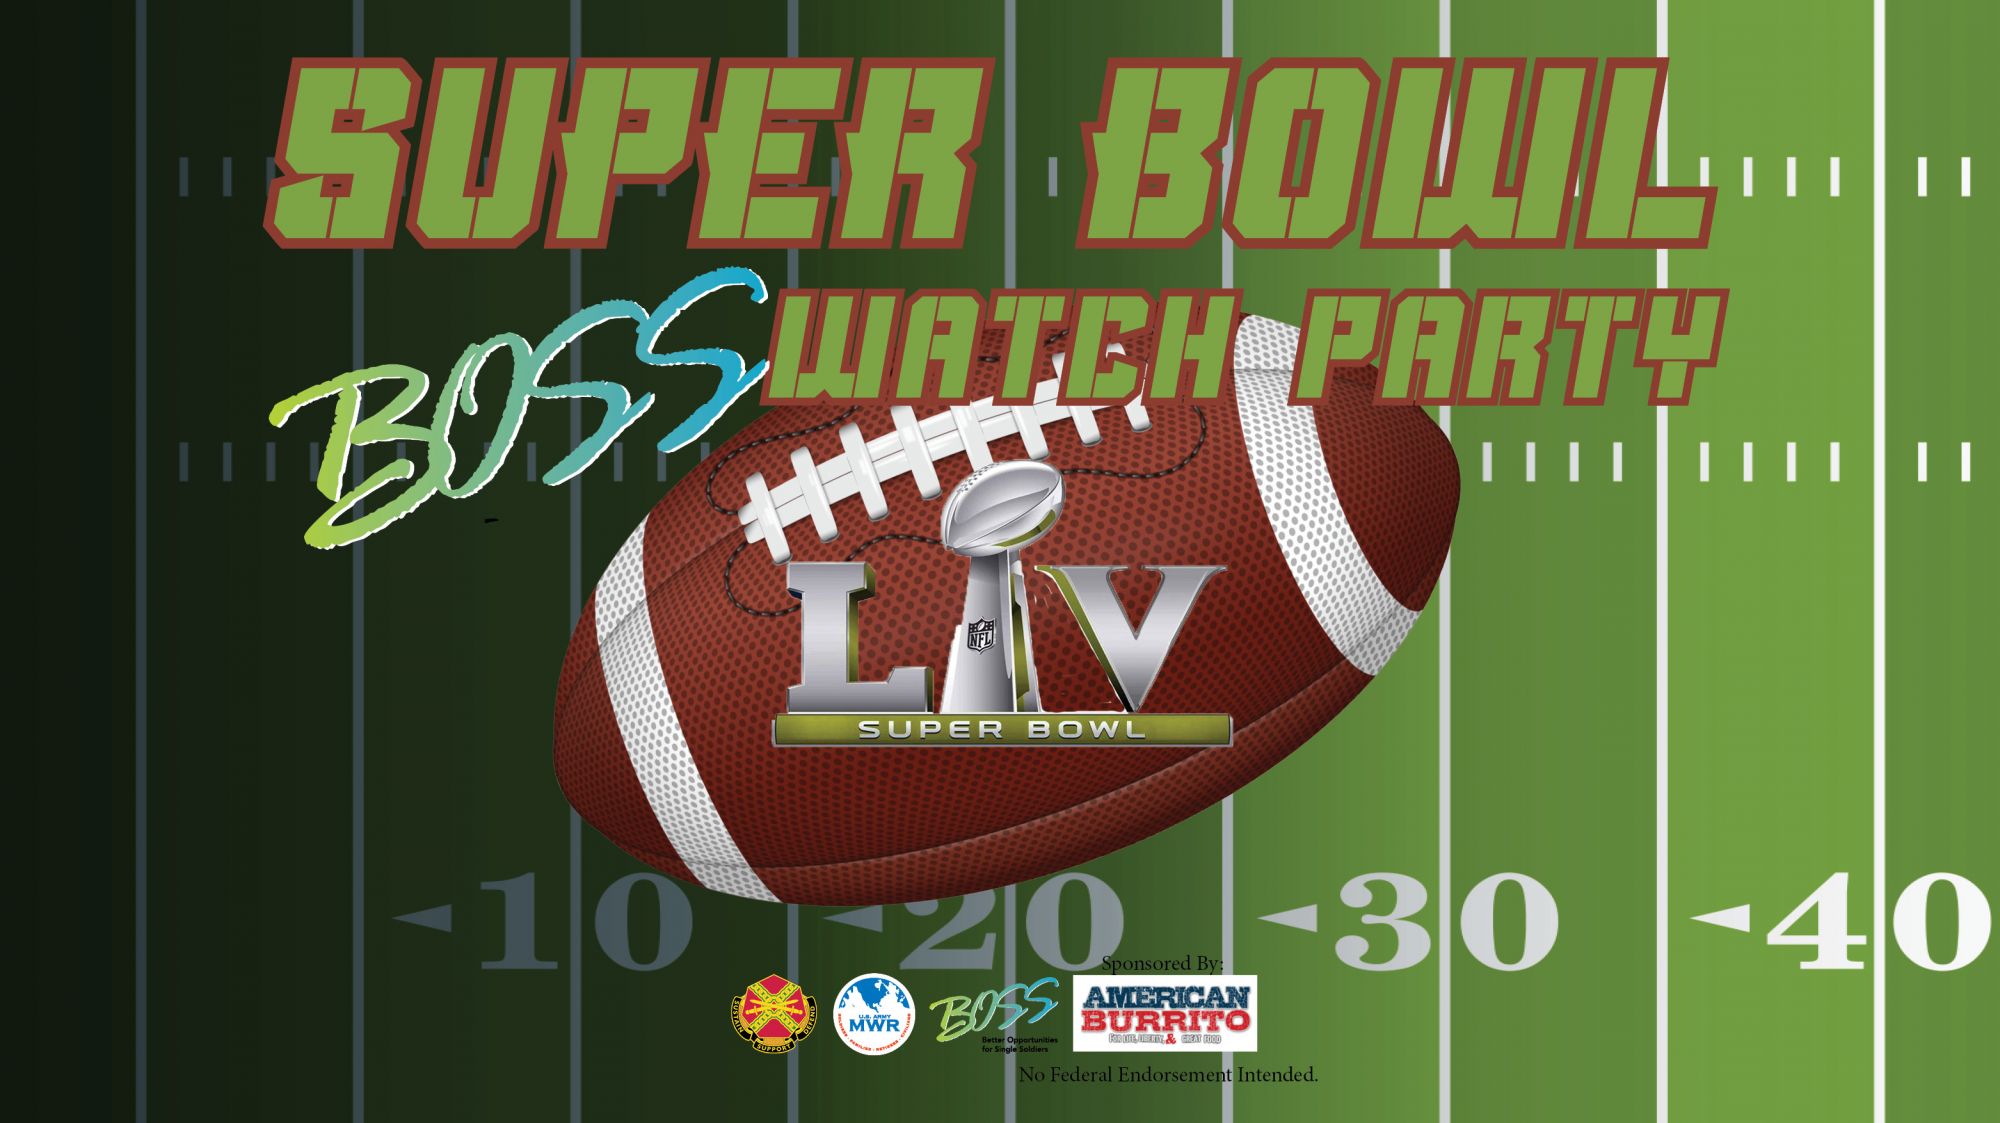 View Event :: Super Bowl LV - BOSS Watch Party :: West Point :: US Army MWR